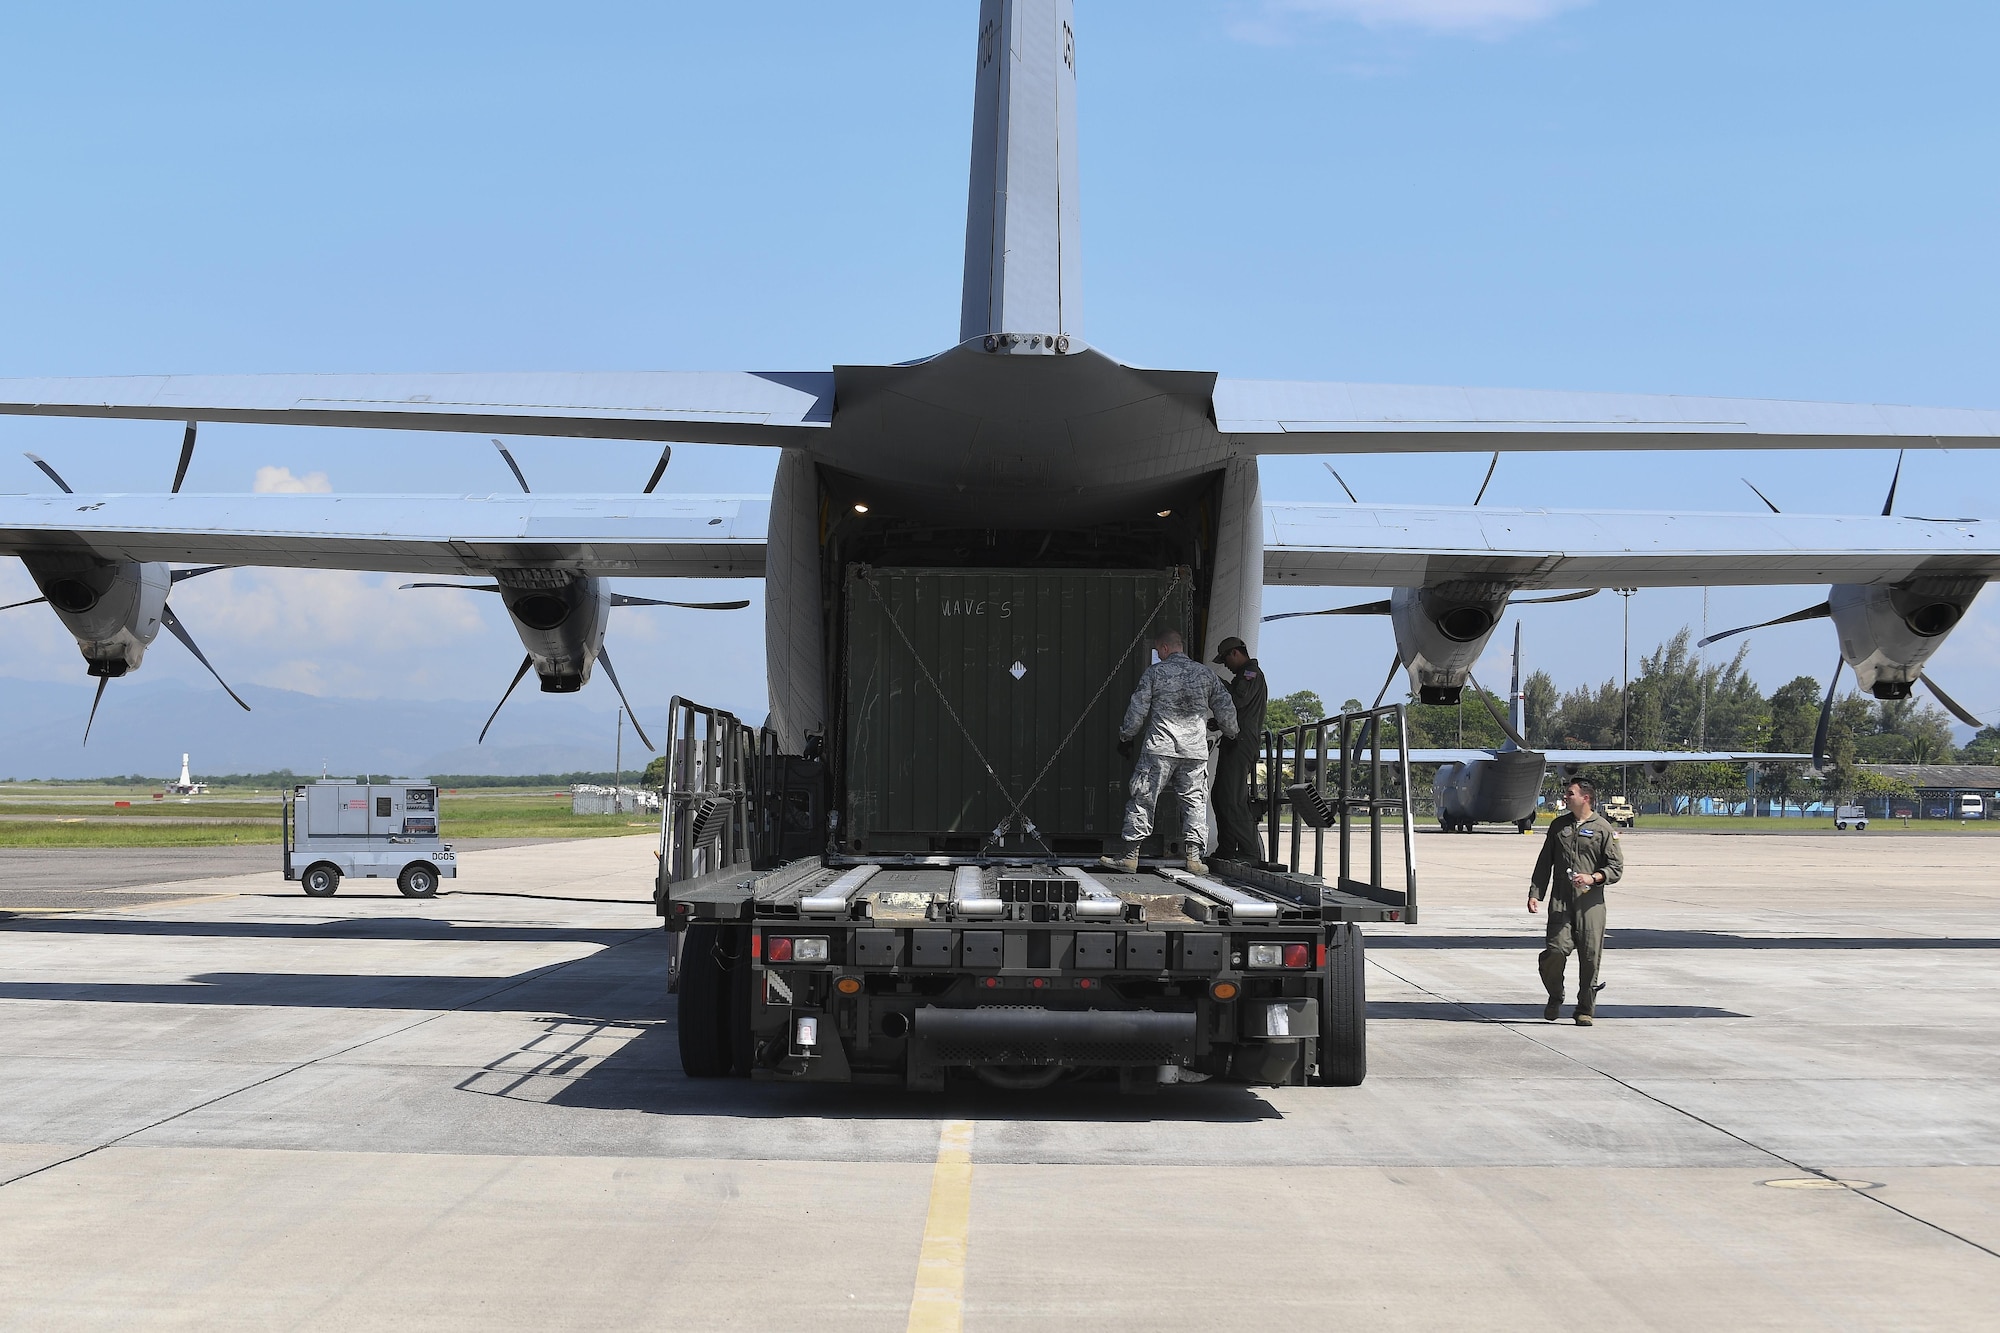 U.S. Air Force Staff Sgt. Dustin Jett, 612th Air Base Squadron senior information controller, helps aircrew members from Dyess Air Force Base, Texas load a “conex” box onto a C-130J Hercules at Soto Cano Air Base, Honduras, Oct. 7, 2016. U.S. Southern Command requested heavy airlift to transport critical equipment packages needed to sustain helicopter flight operations in Haiti being conducted by Special Purpose Marine Air-Ground Task Force-Southern Command and Joint Task Force-Bravo’s 1st Battalion, 228th Aviation Regiment using two CH-53E Super Stallions, three CH-47 Chinooks, and two UH-60L and two HH-60L Black Hawks in support of the U.S. Agency for International Development-led mission to alleviate human suffering and bolster Haitian disaster response capabilities.